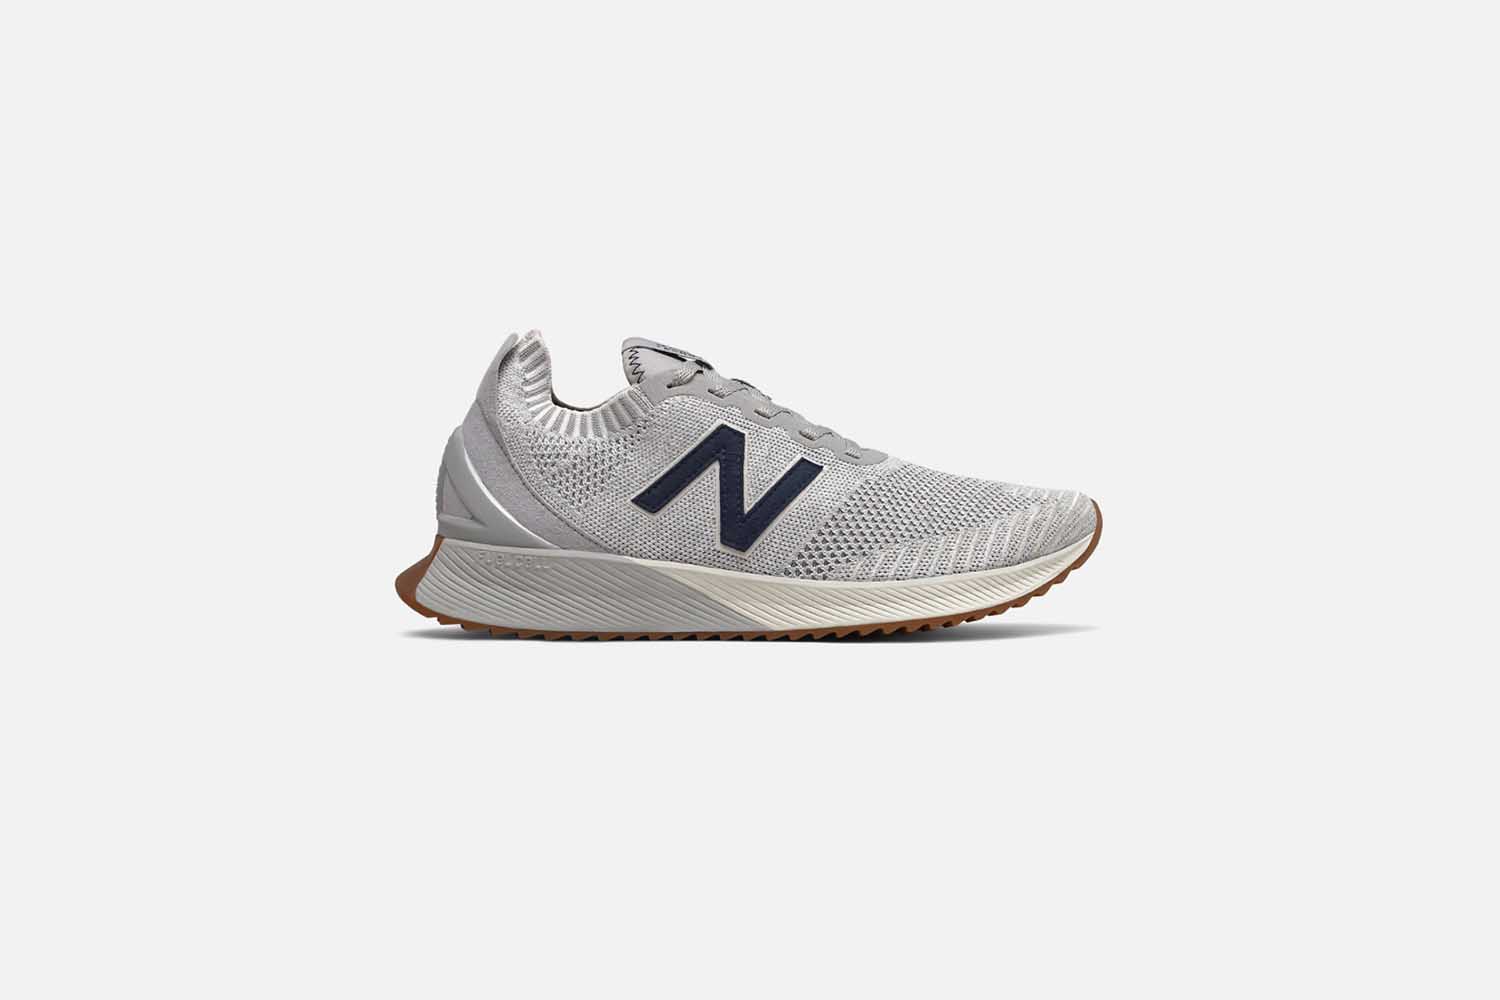 Deal: Take 25% Off New Balance Running Shoes